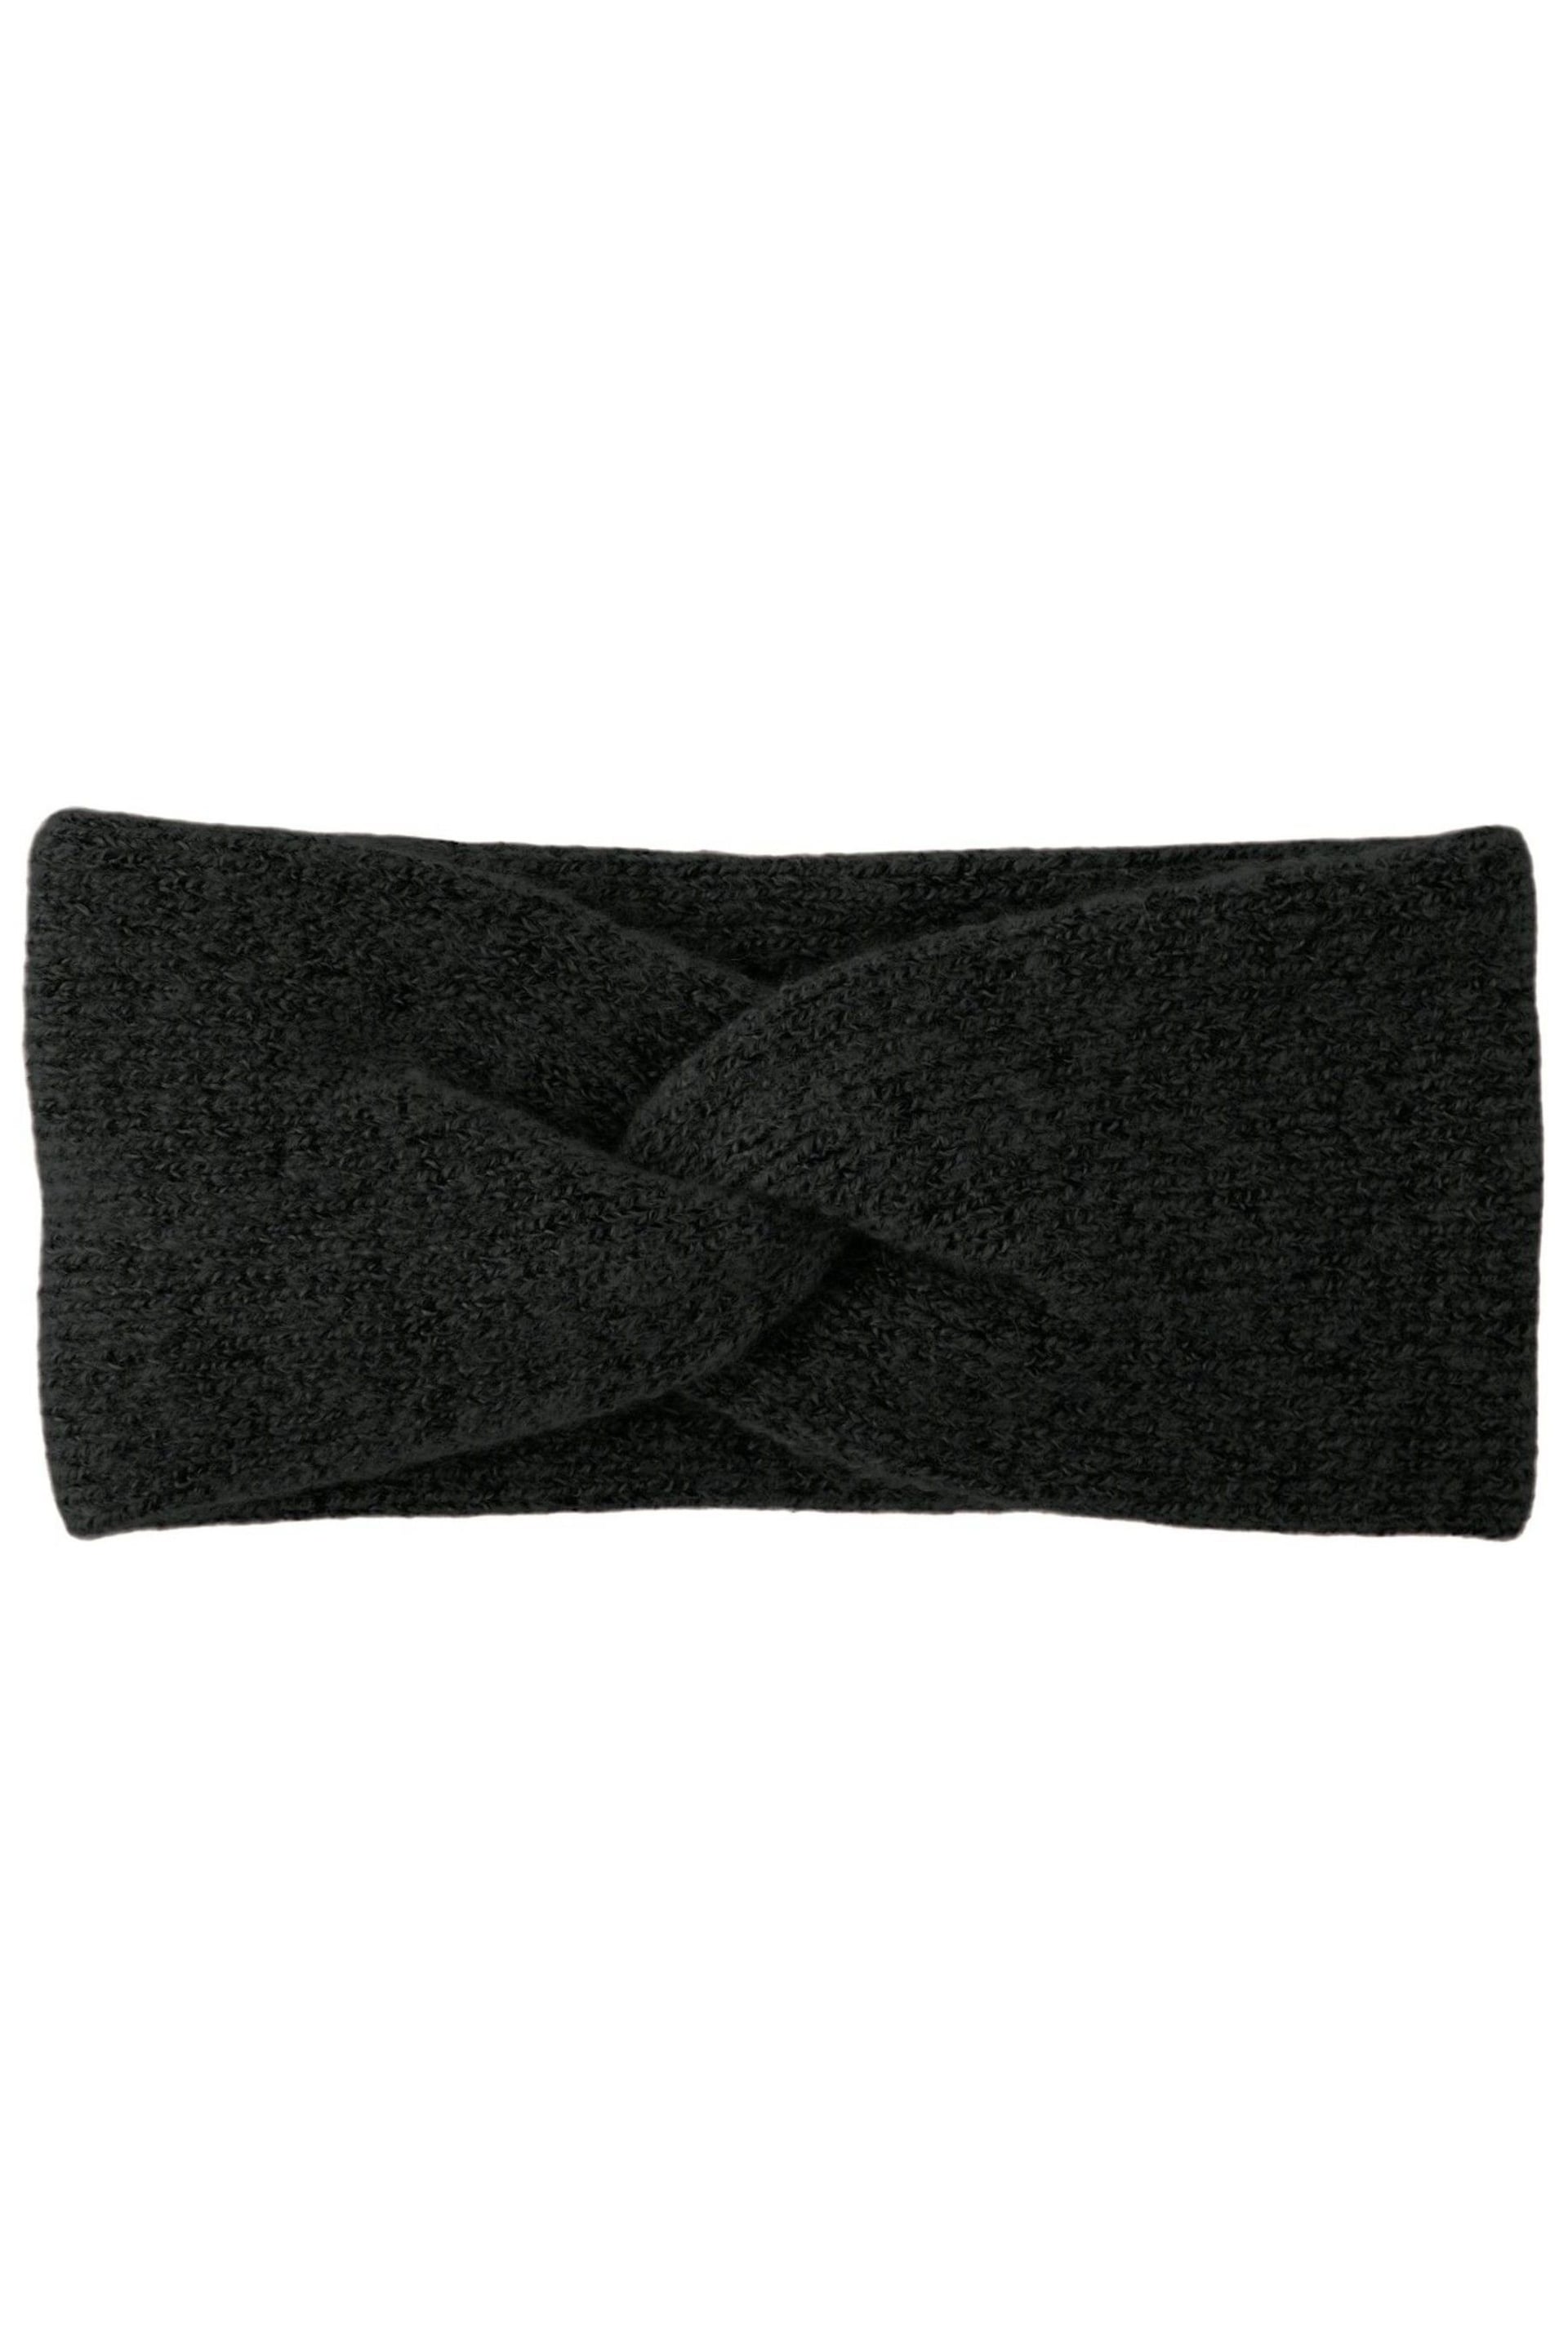 PIECES Black Knot Detail Headband - Image 1 of 1